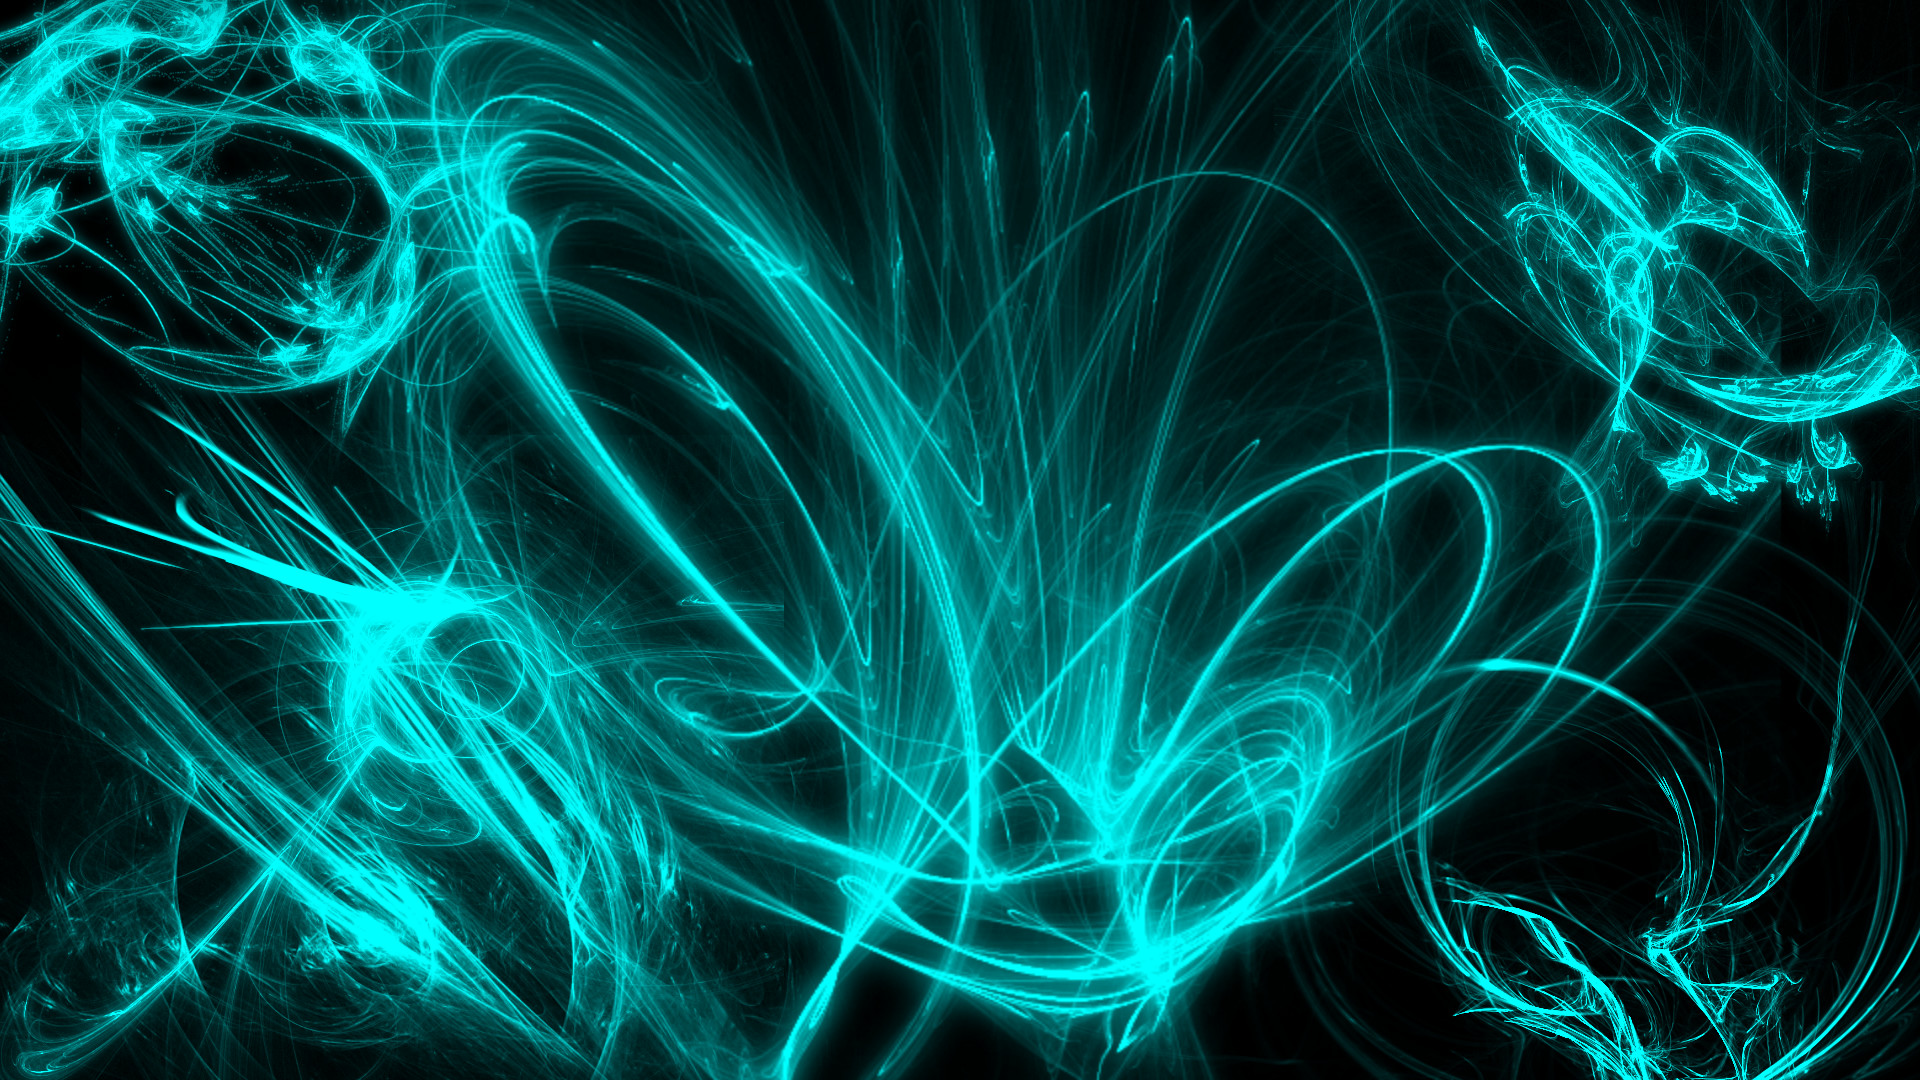 1920x1080 ... Blue abstract wallpaper | HD Abstract Wallpapers ...